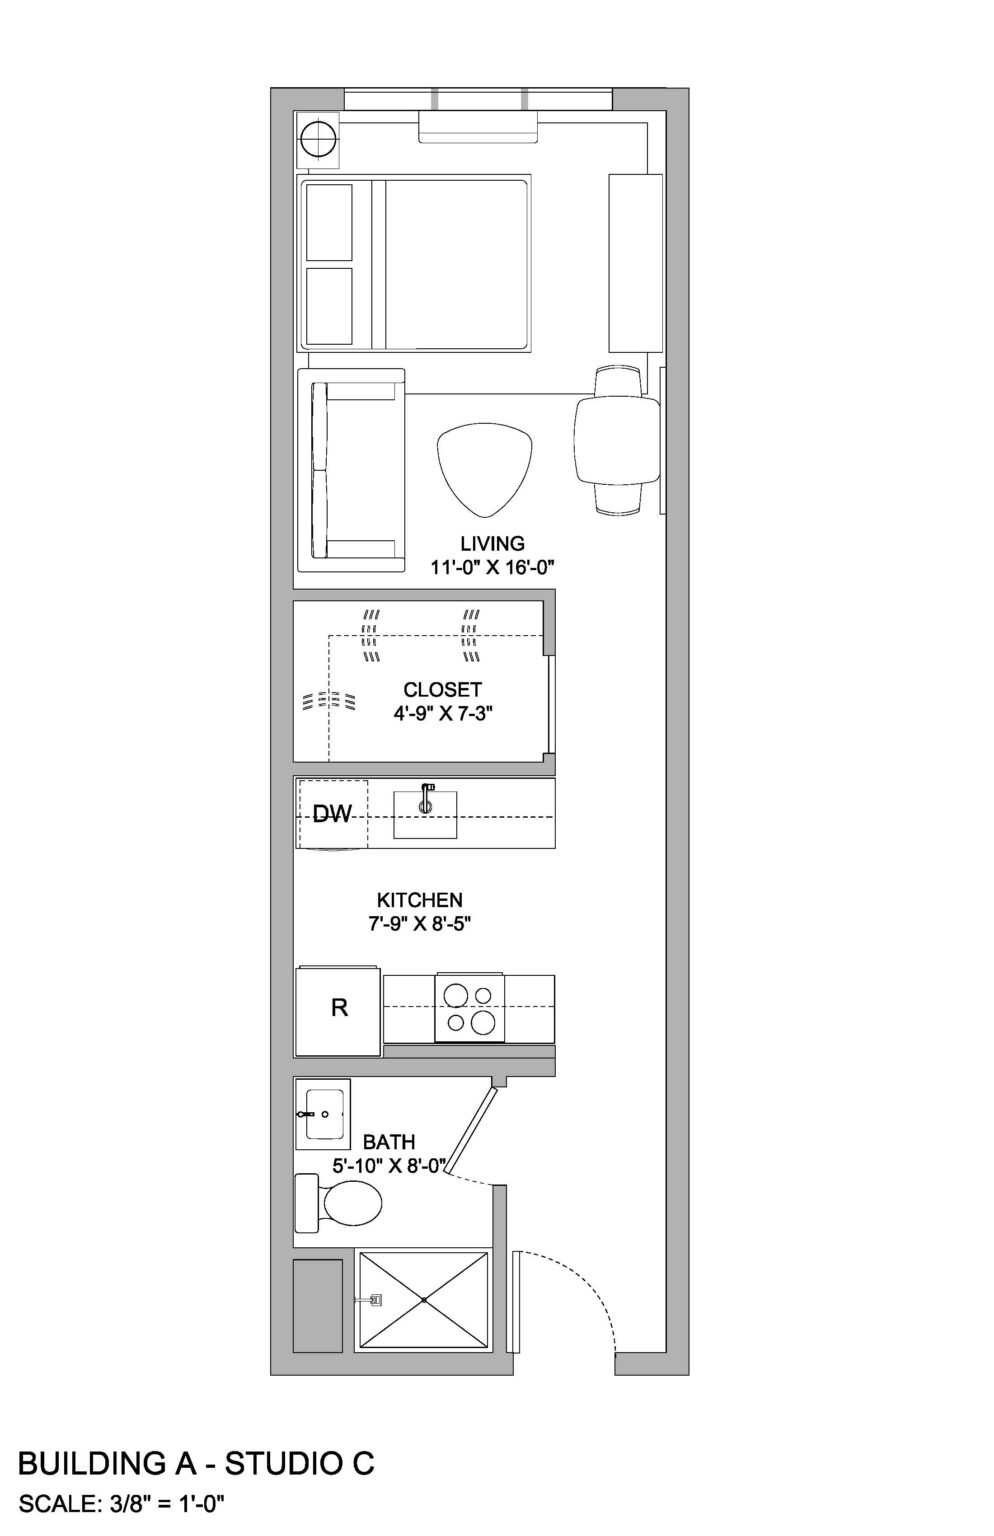 Building A Floor Plans_Page_STC